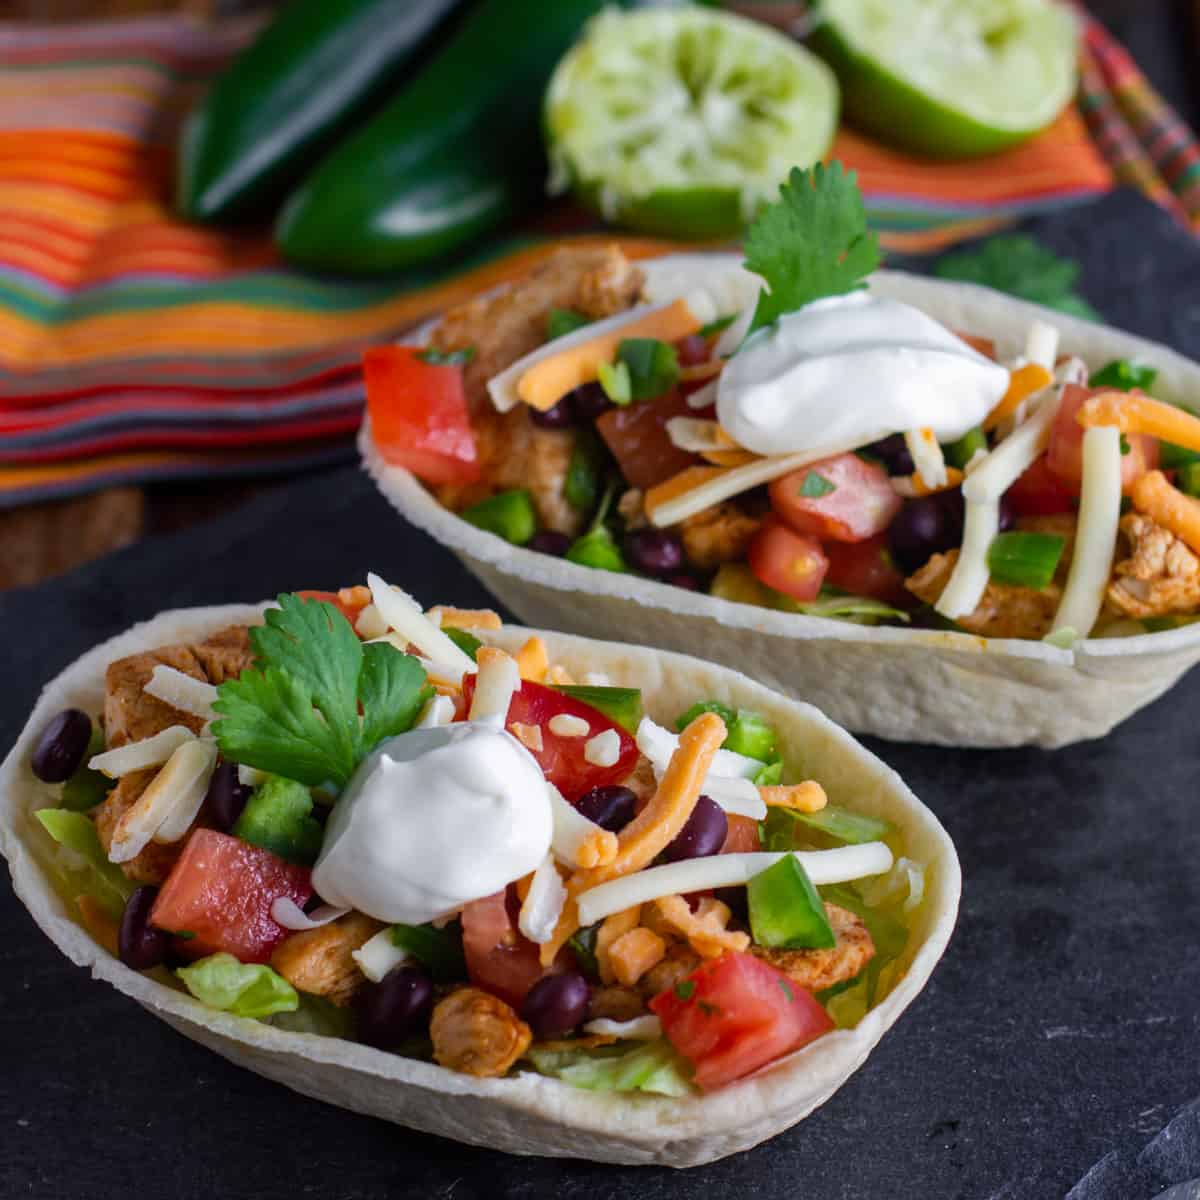 Taco bowls filled with toppings.